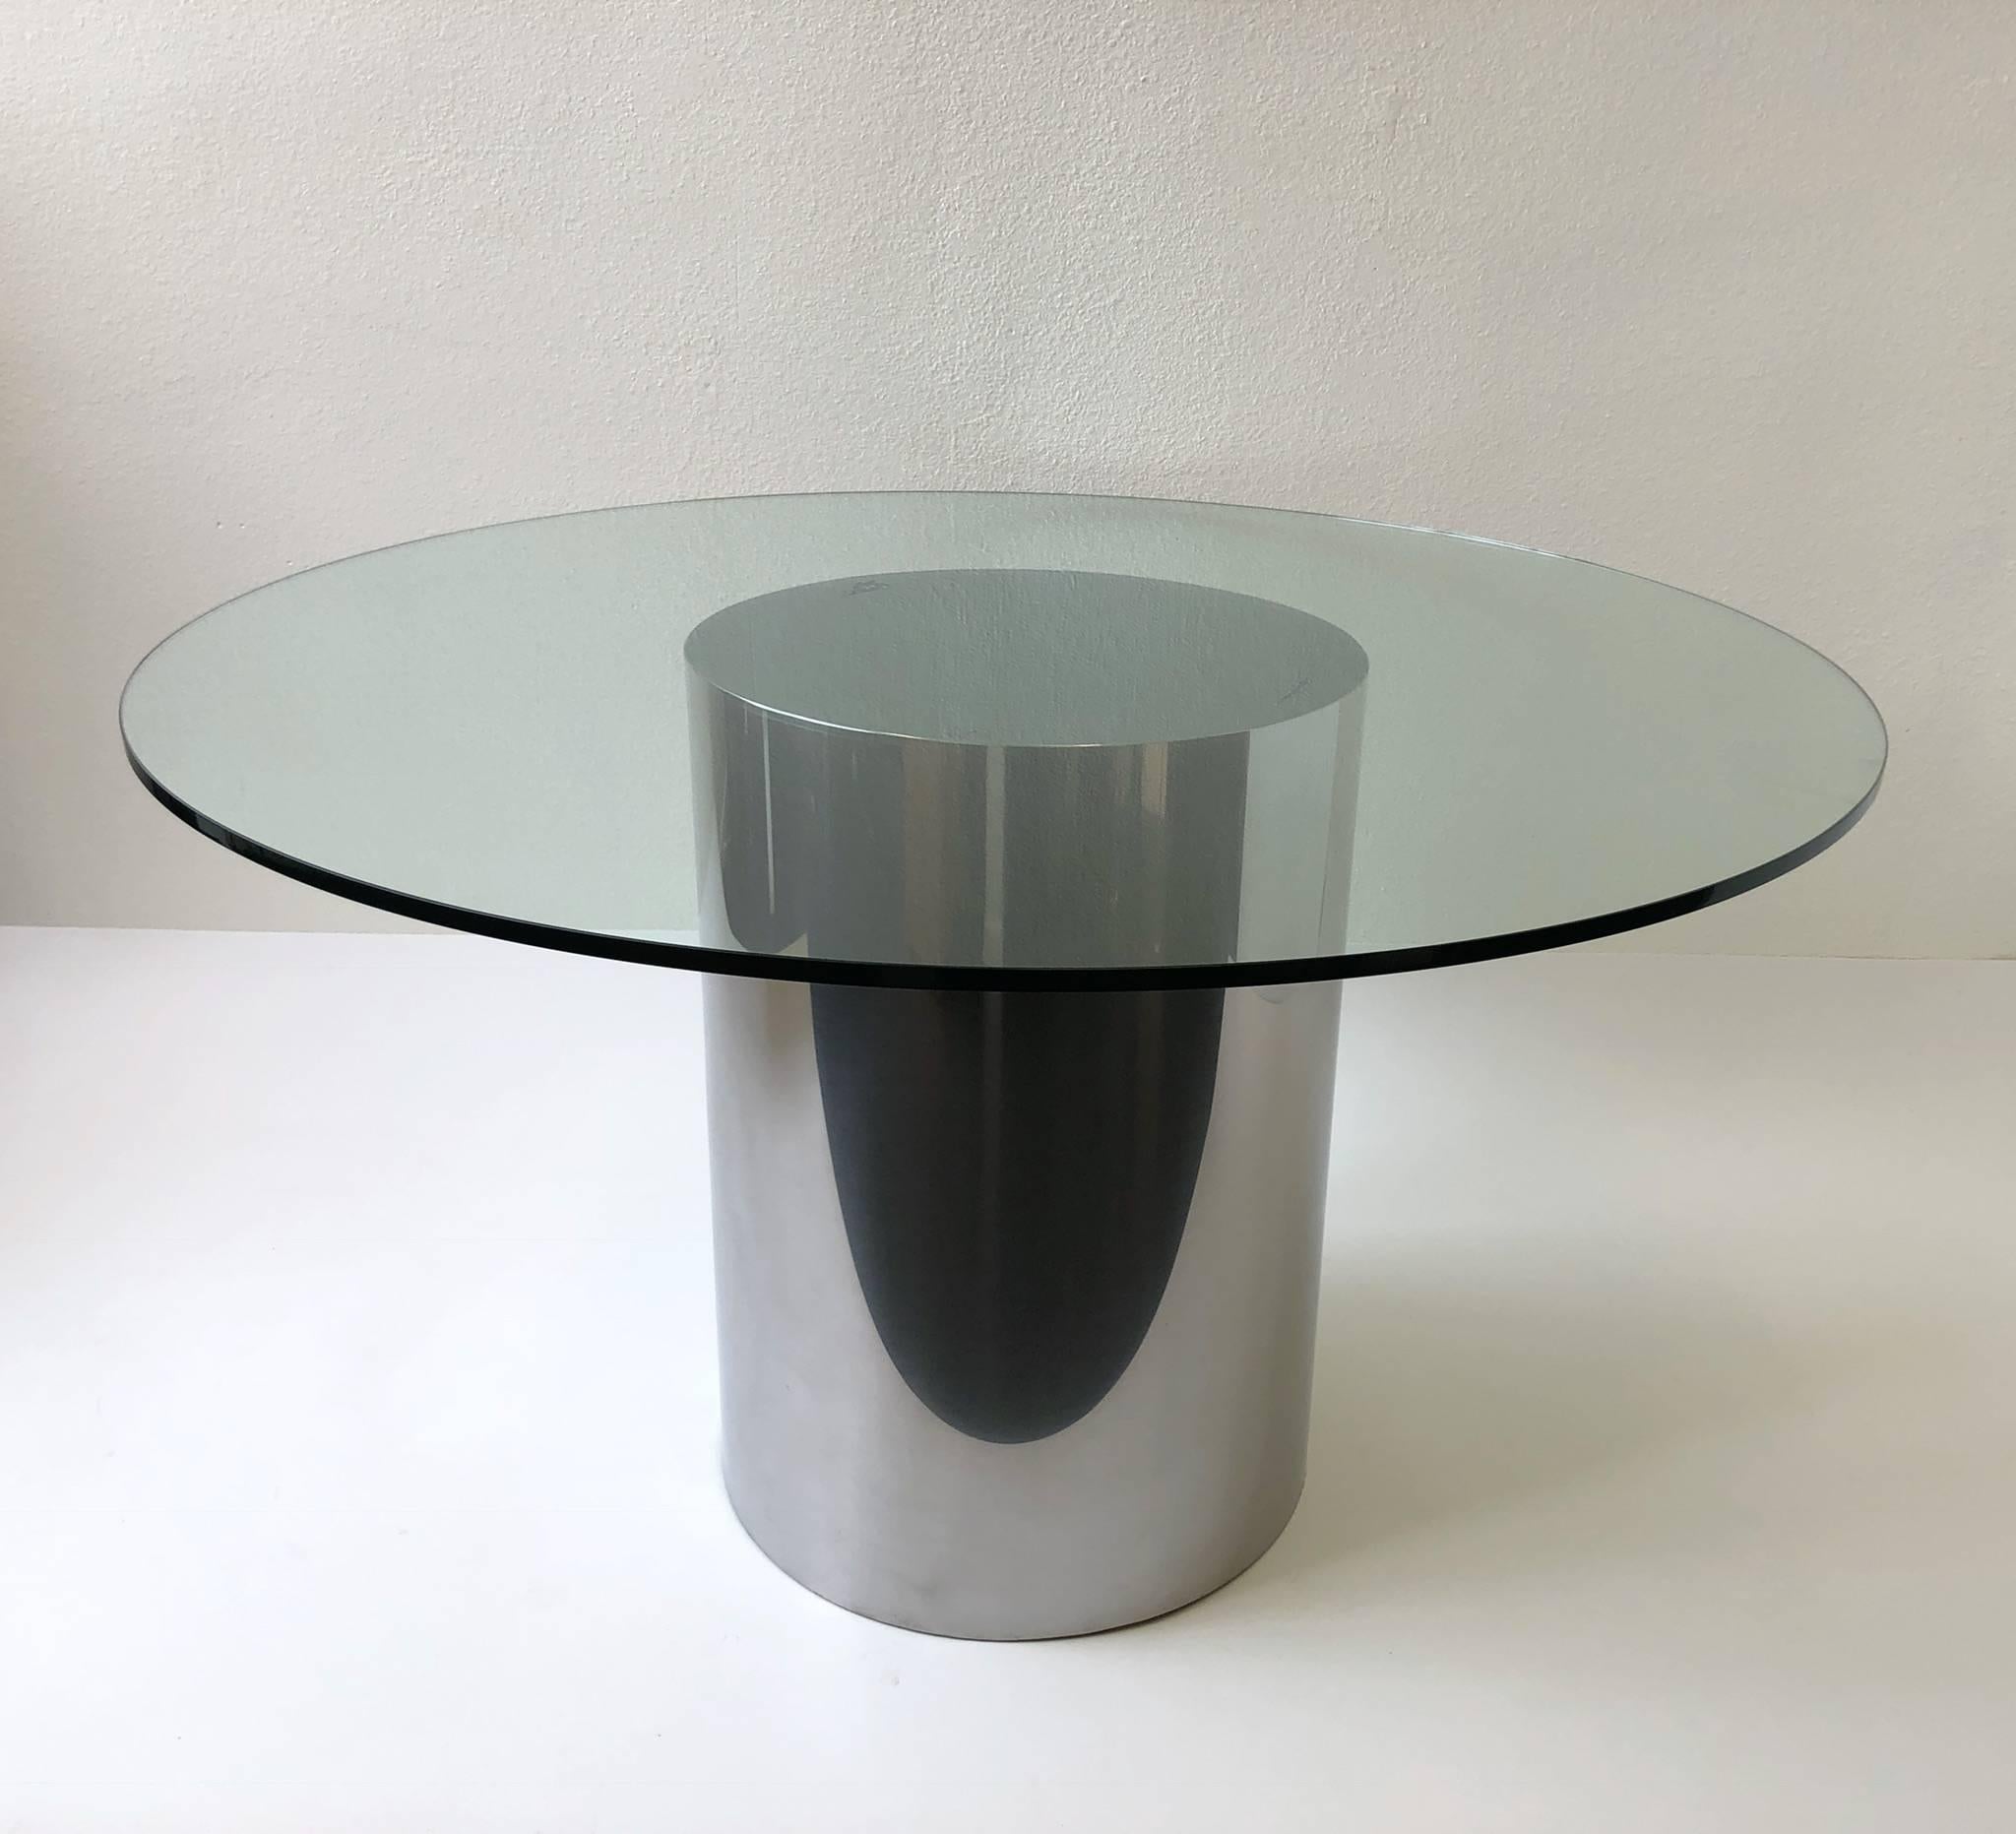 A polish stainless steel and glass drum dining table by Brueton. Newly professionally polish and new 48” diameter 1/2” thick glass top.

Dimensions: 48” diameter 28.5” high.
Just drum base: 20” diameter 28” high.